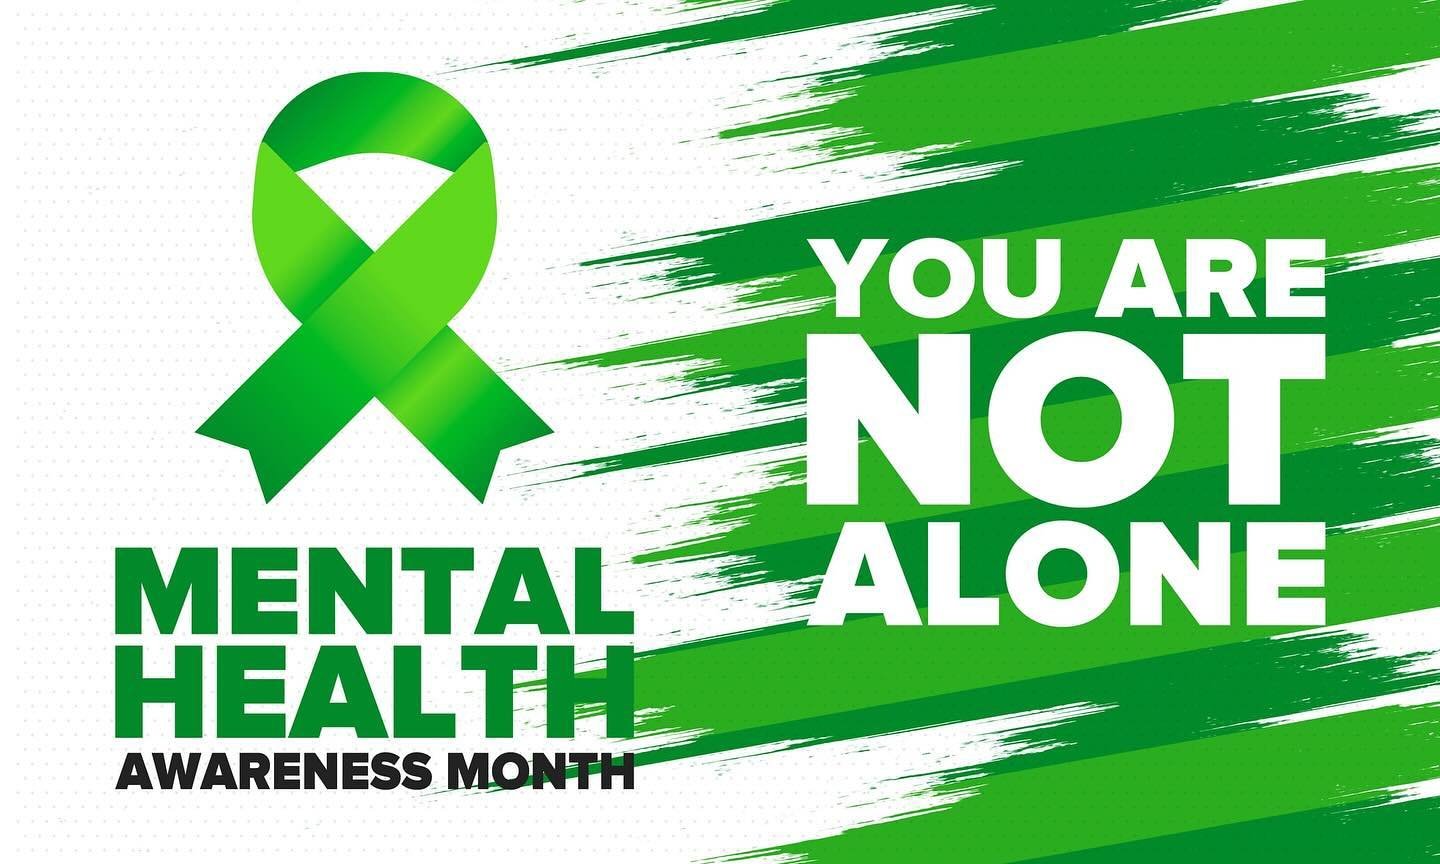 💚May is Mental Health Awareness Month! 💚

Let&rsquo;s take a moment to reflect on the importance of understanding mental health. 

Mental health is just as crucial as physical health. It affects how we think, feel, and act. By understanding mental 